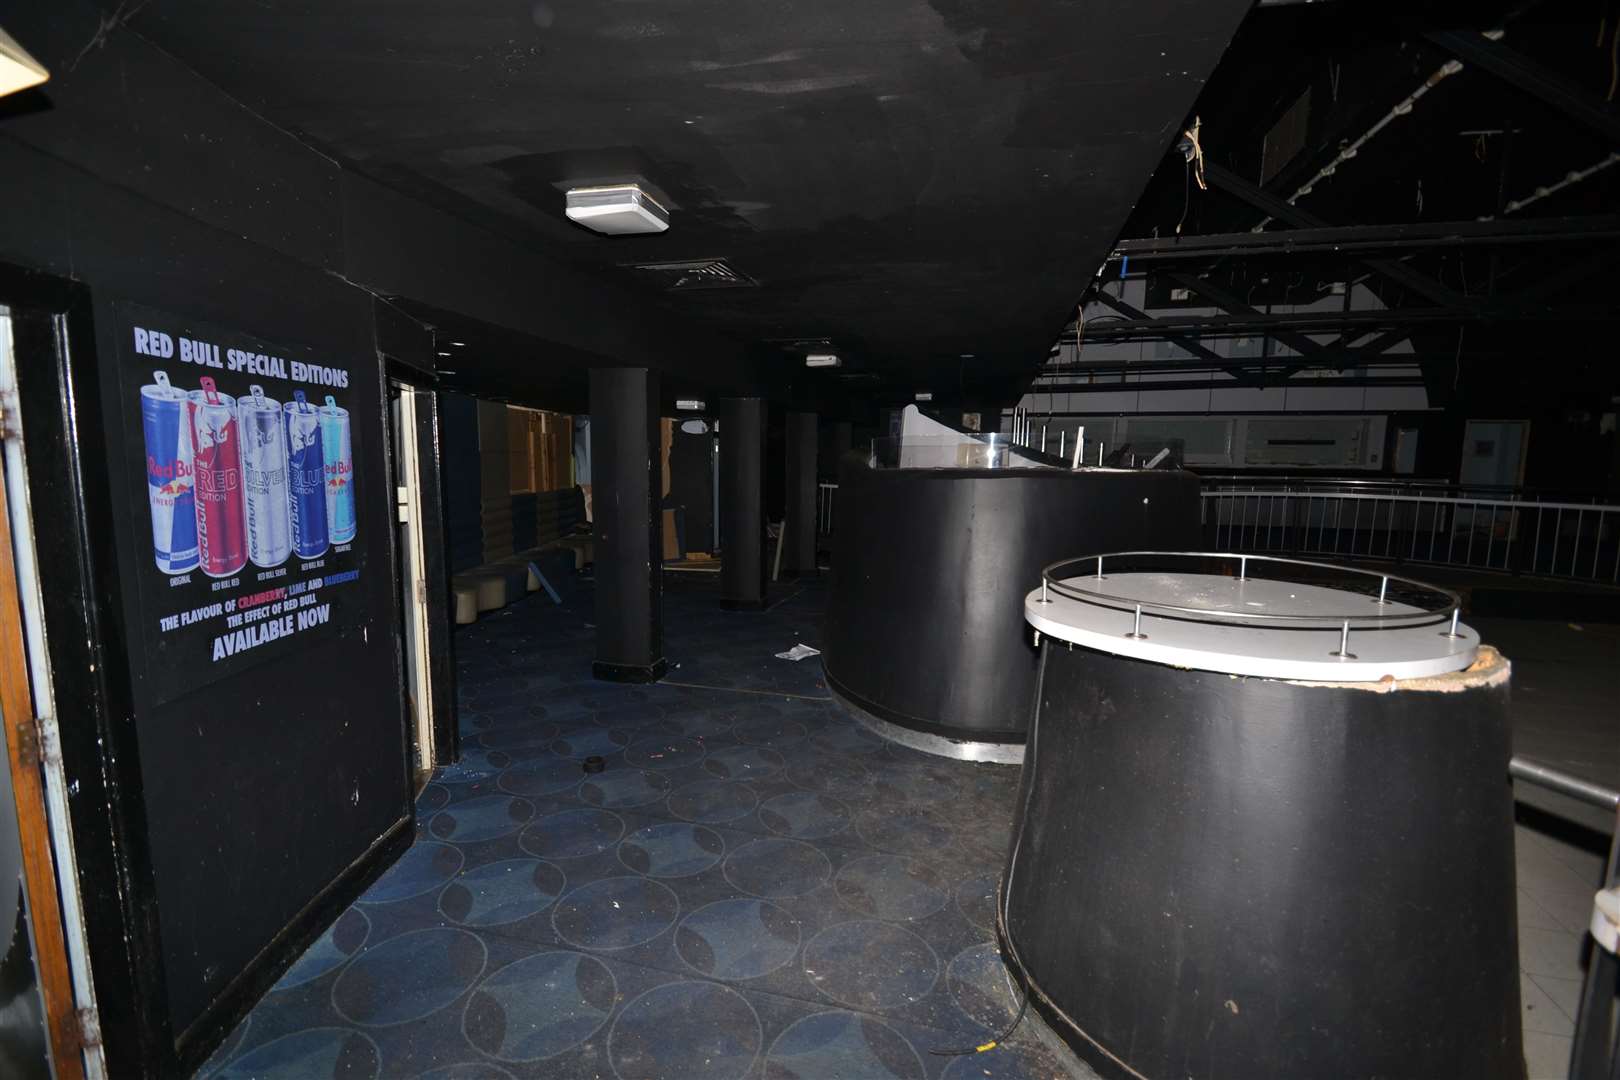 The Liquid site was rebranded as Liquid and Envy in 2007